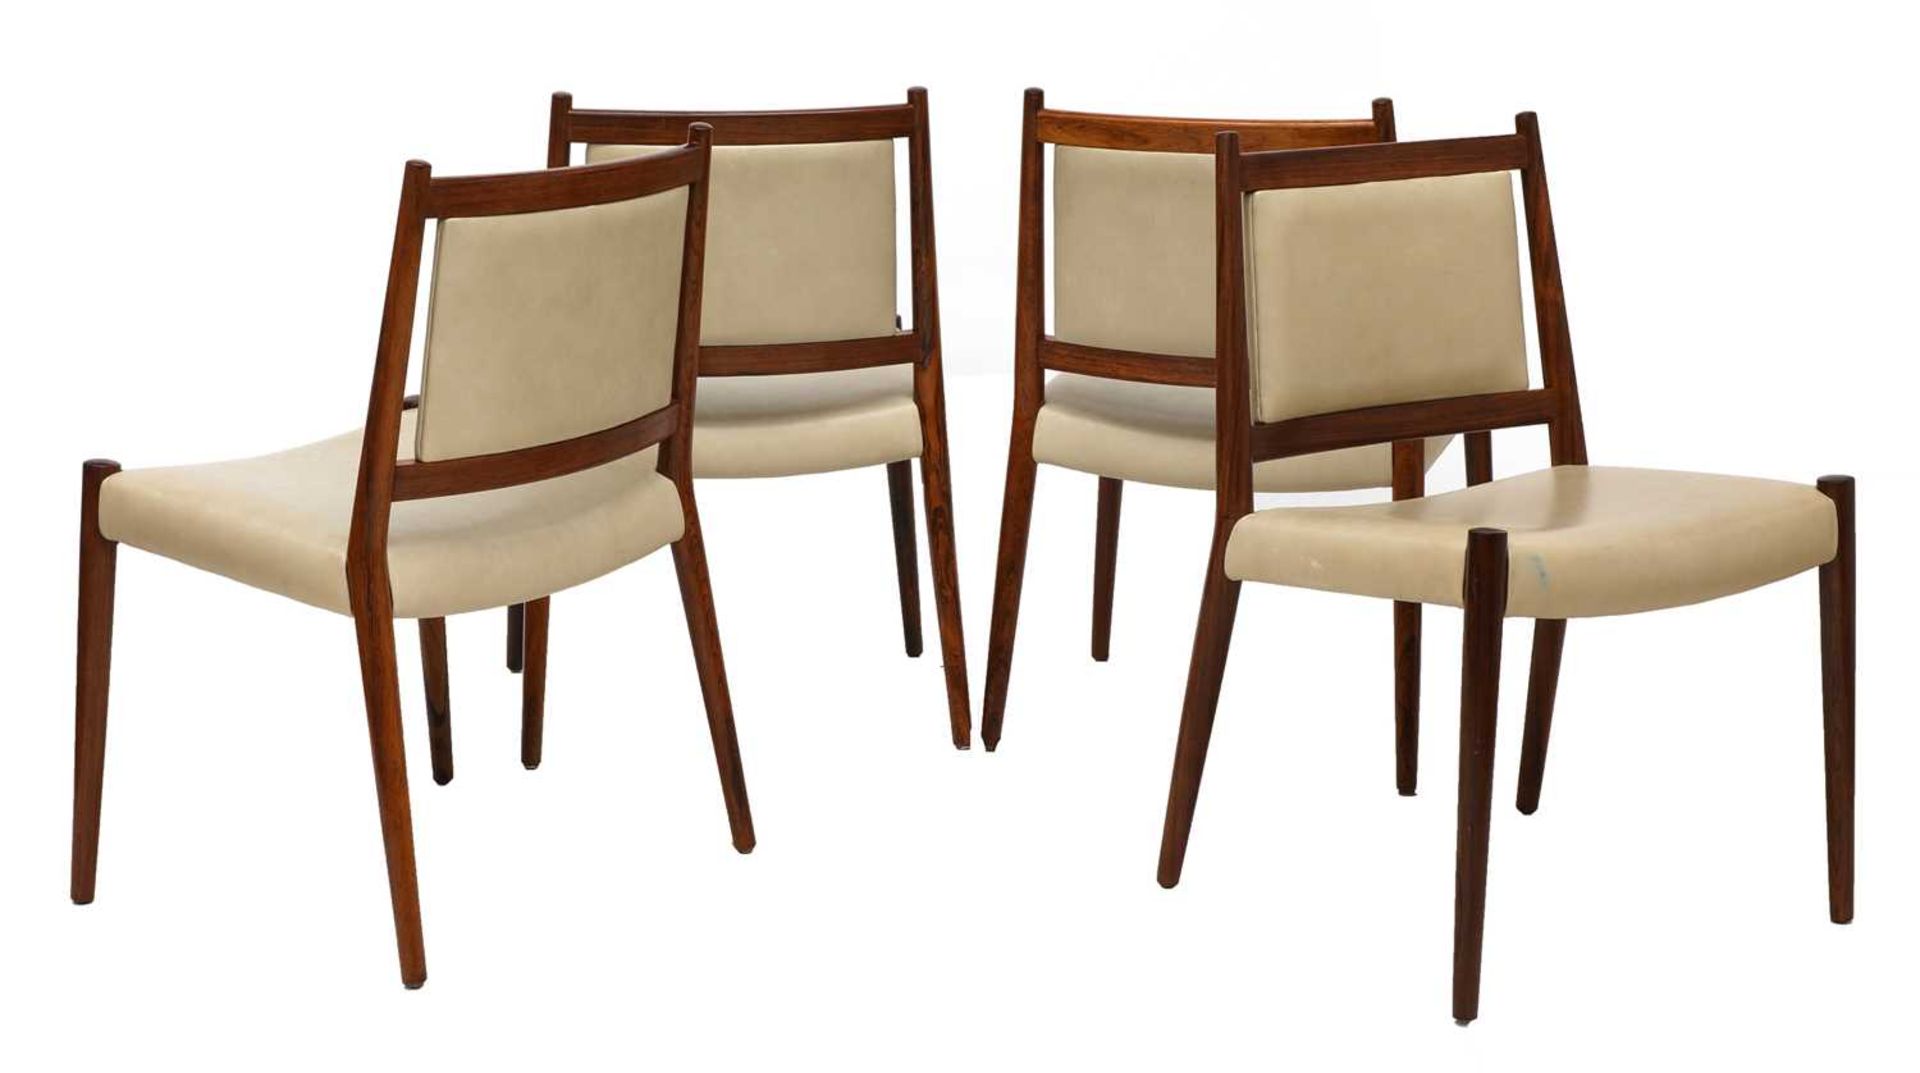 A set of four rosewood dining chairs, § - Image 2 of 9